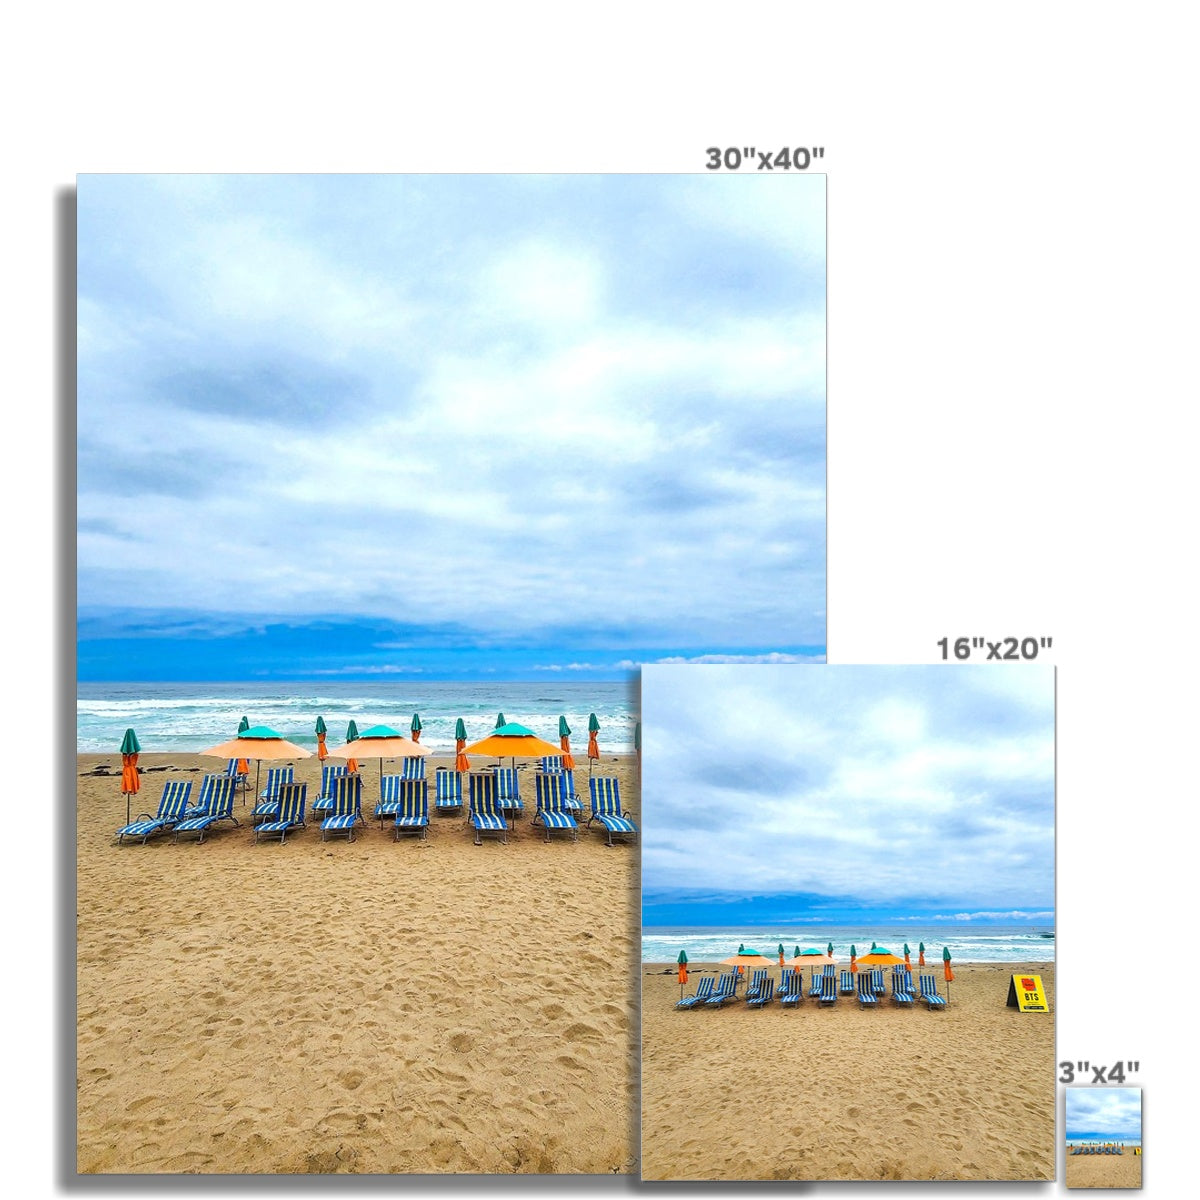 BTS Butter photo shoot Location Beach in south Korea_1 C-Type Print